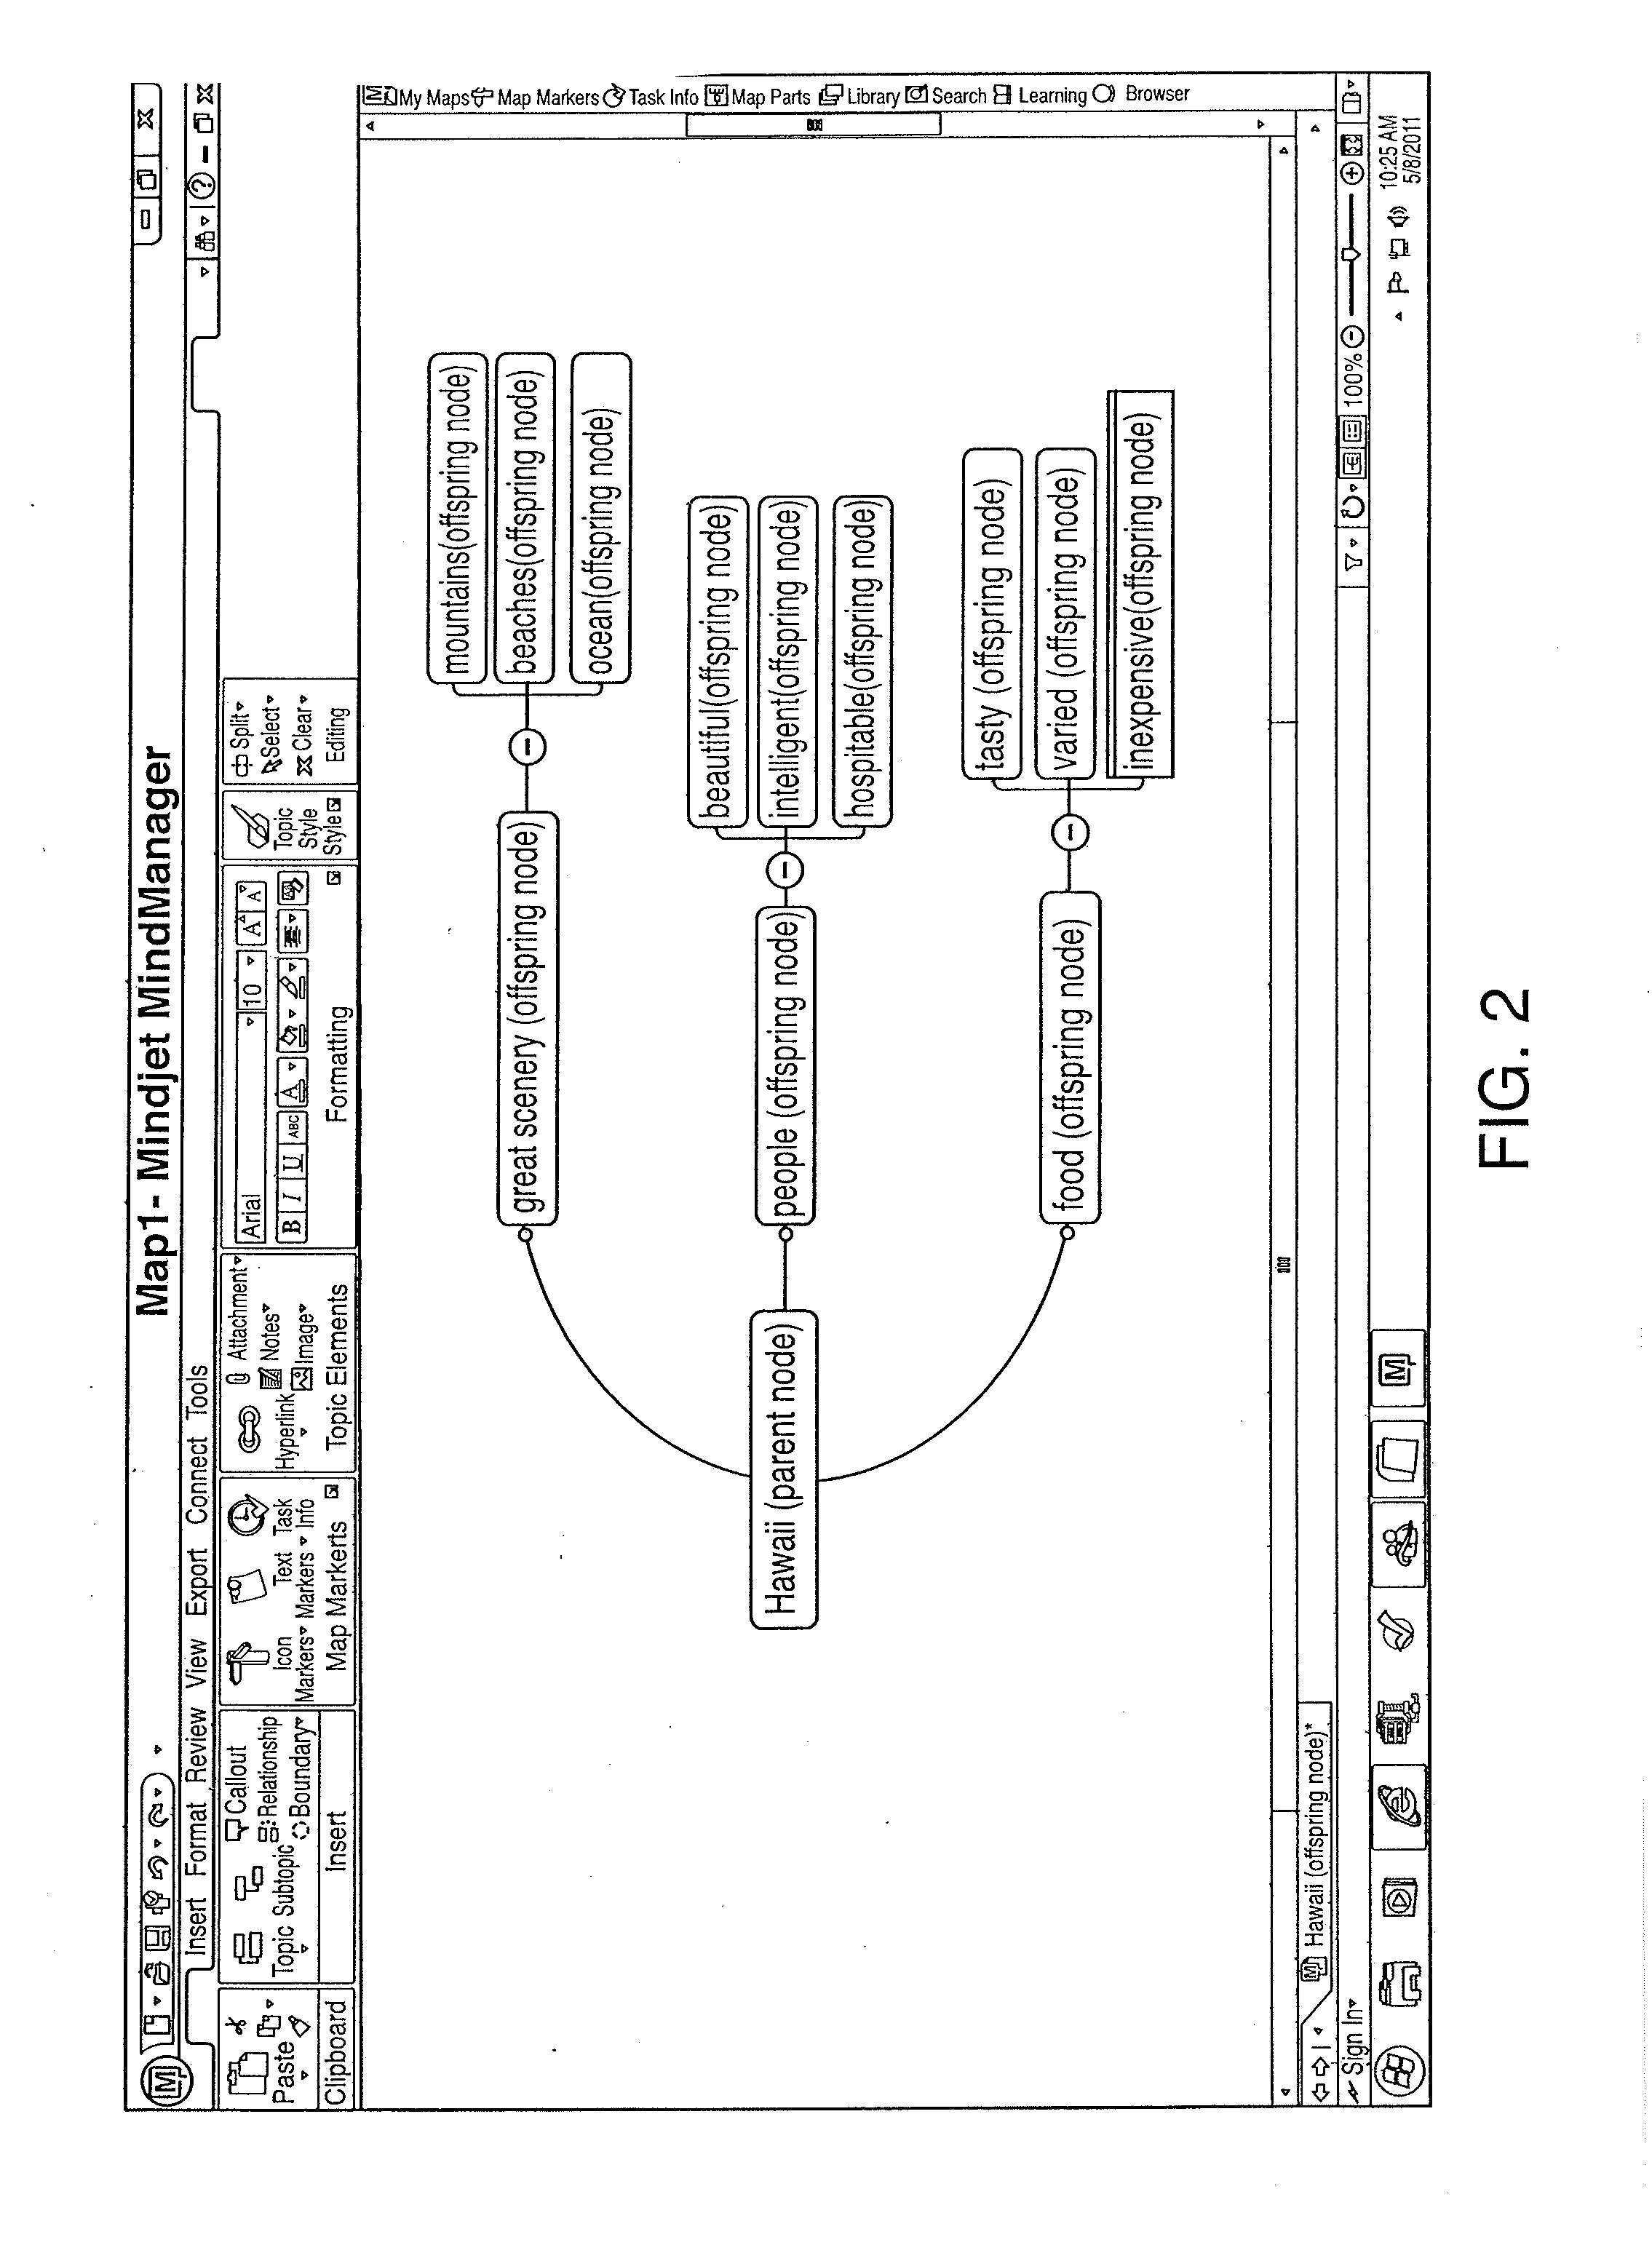 Method for generating visual mapping of knowledge information from parsing of text inputs for subjects and predicates